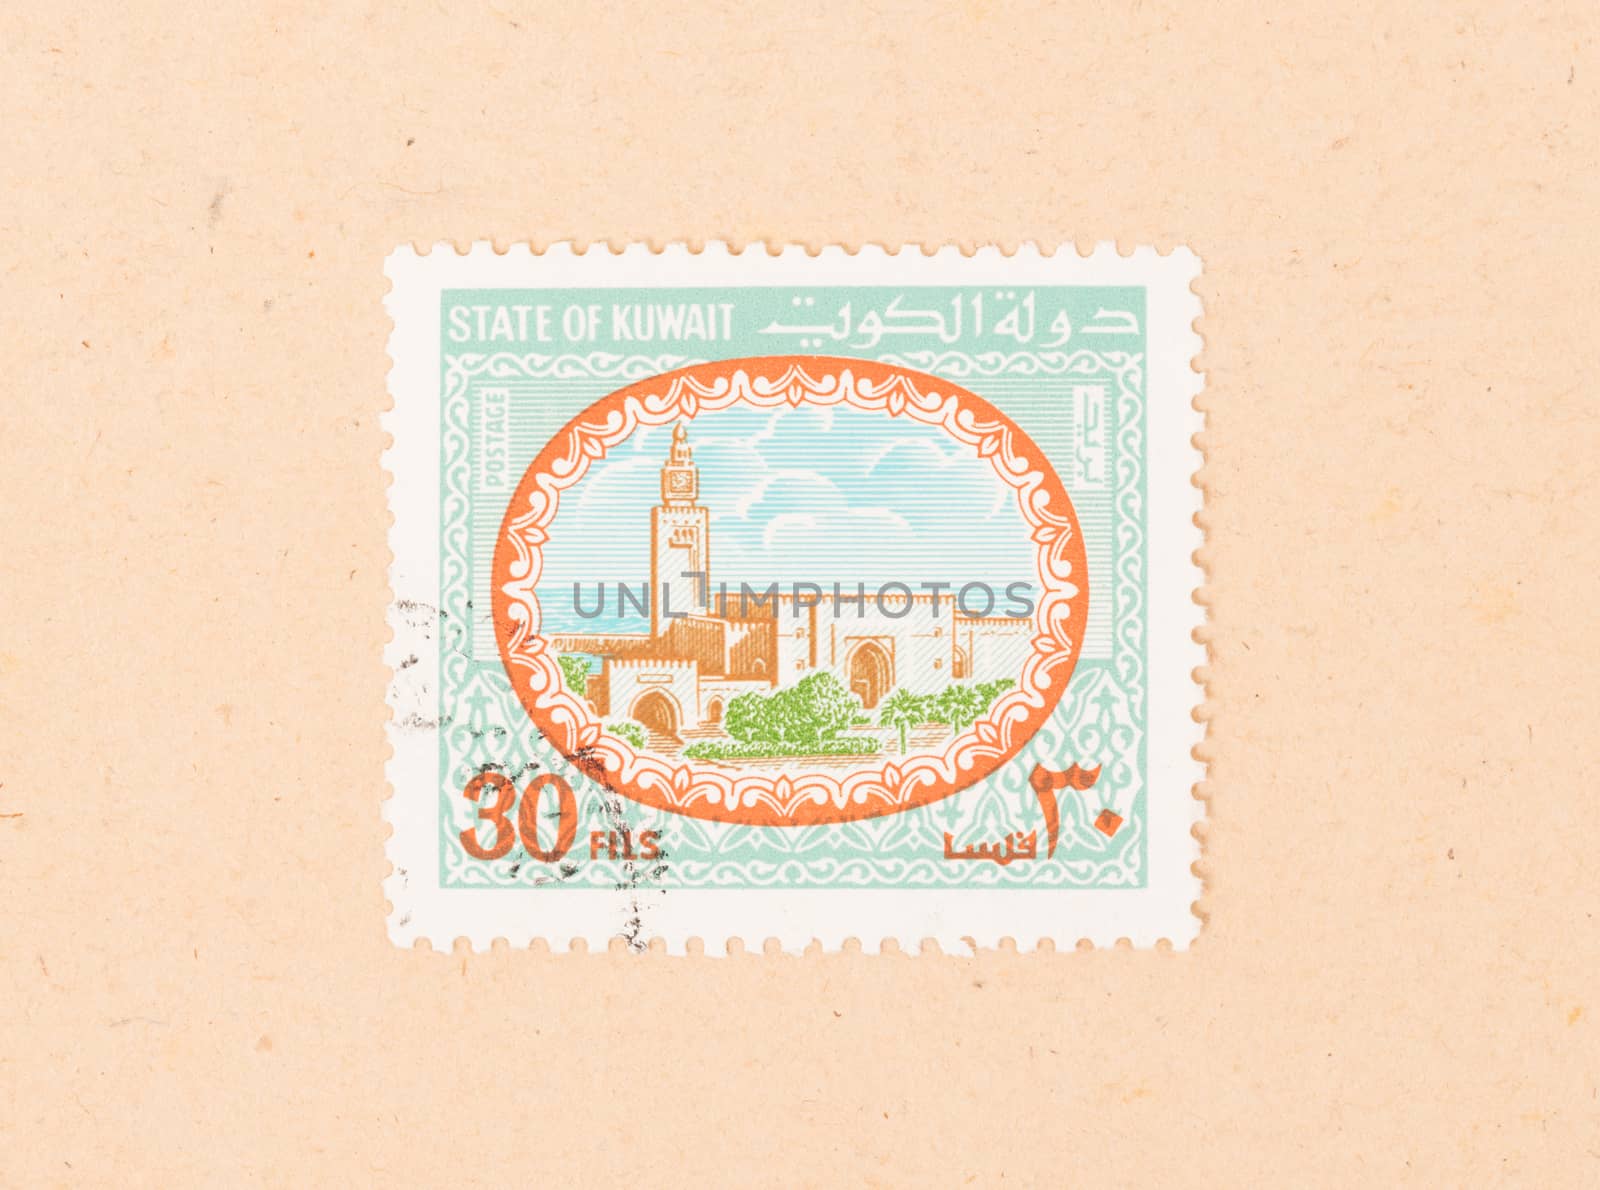 KUWAIT - CIRCA 1980: A stamp printed in Kuwait shows an old buil by michaklootwijk